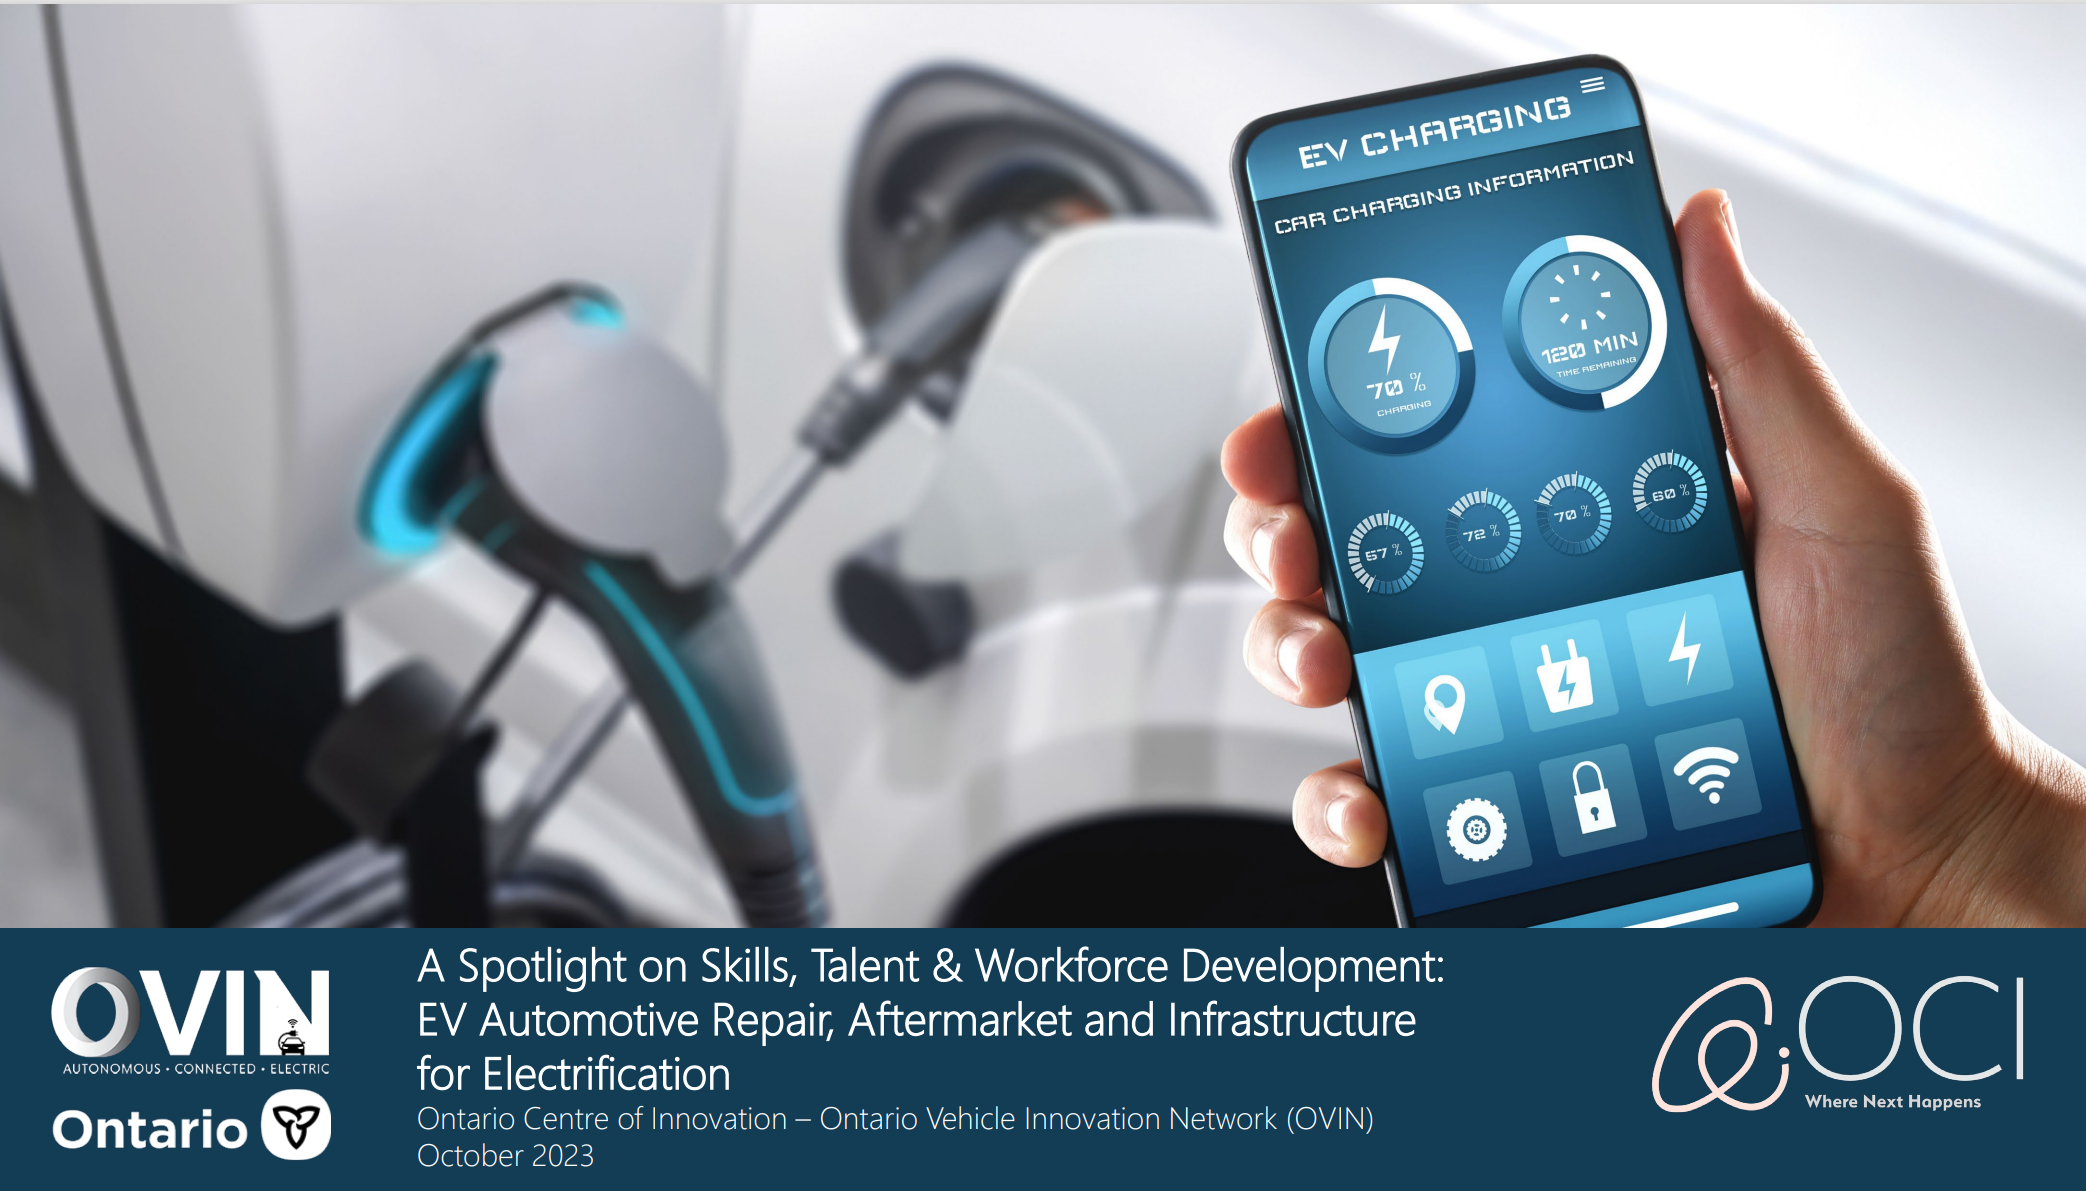 A Spotlight on Skills, Talent & Workforce Development: EV Automotive Repair, Aftermarket and Infrastructure for Electrification